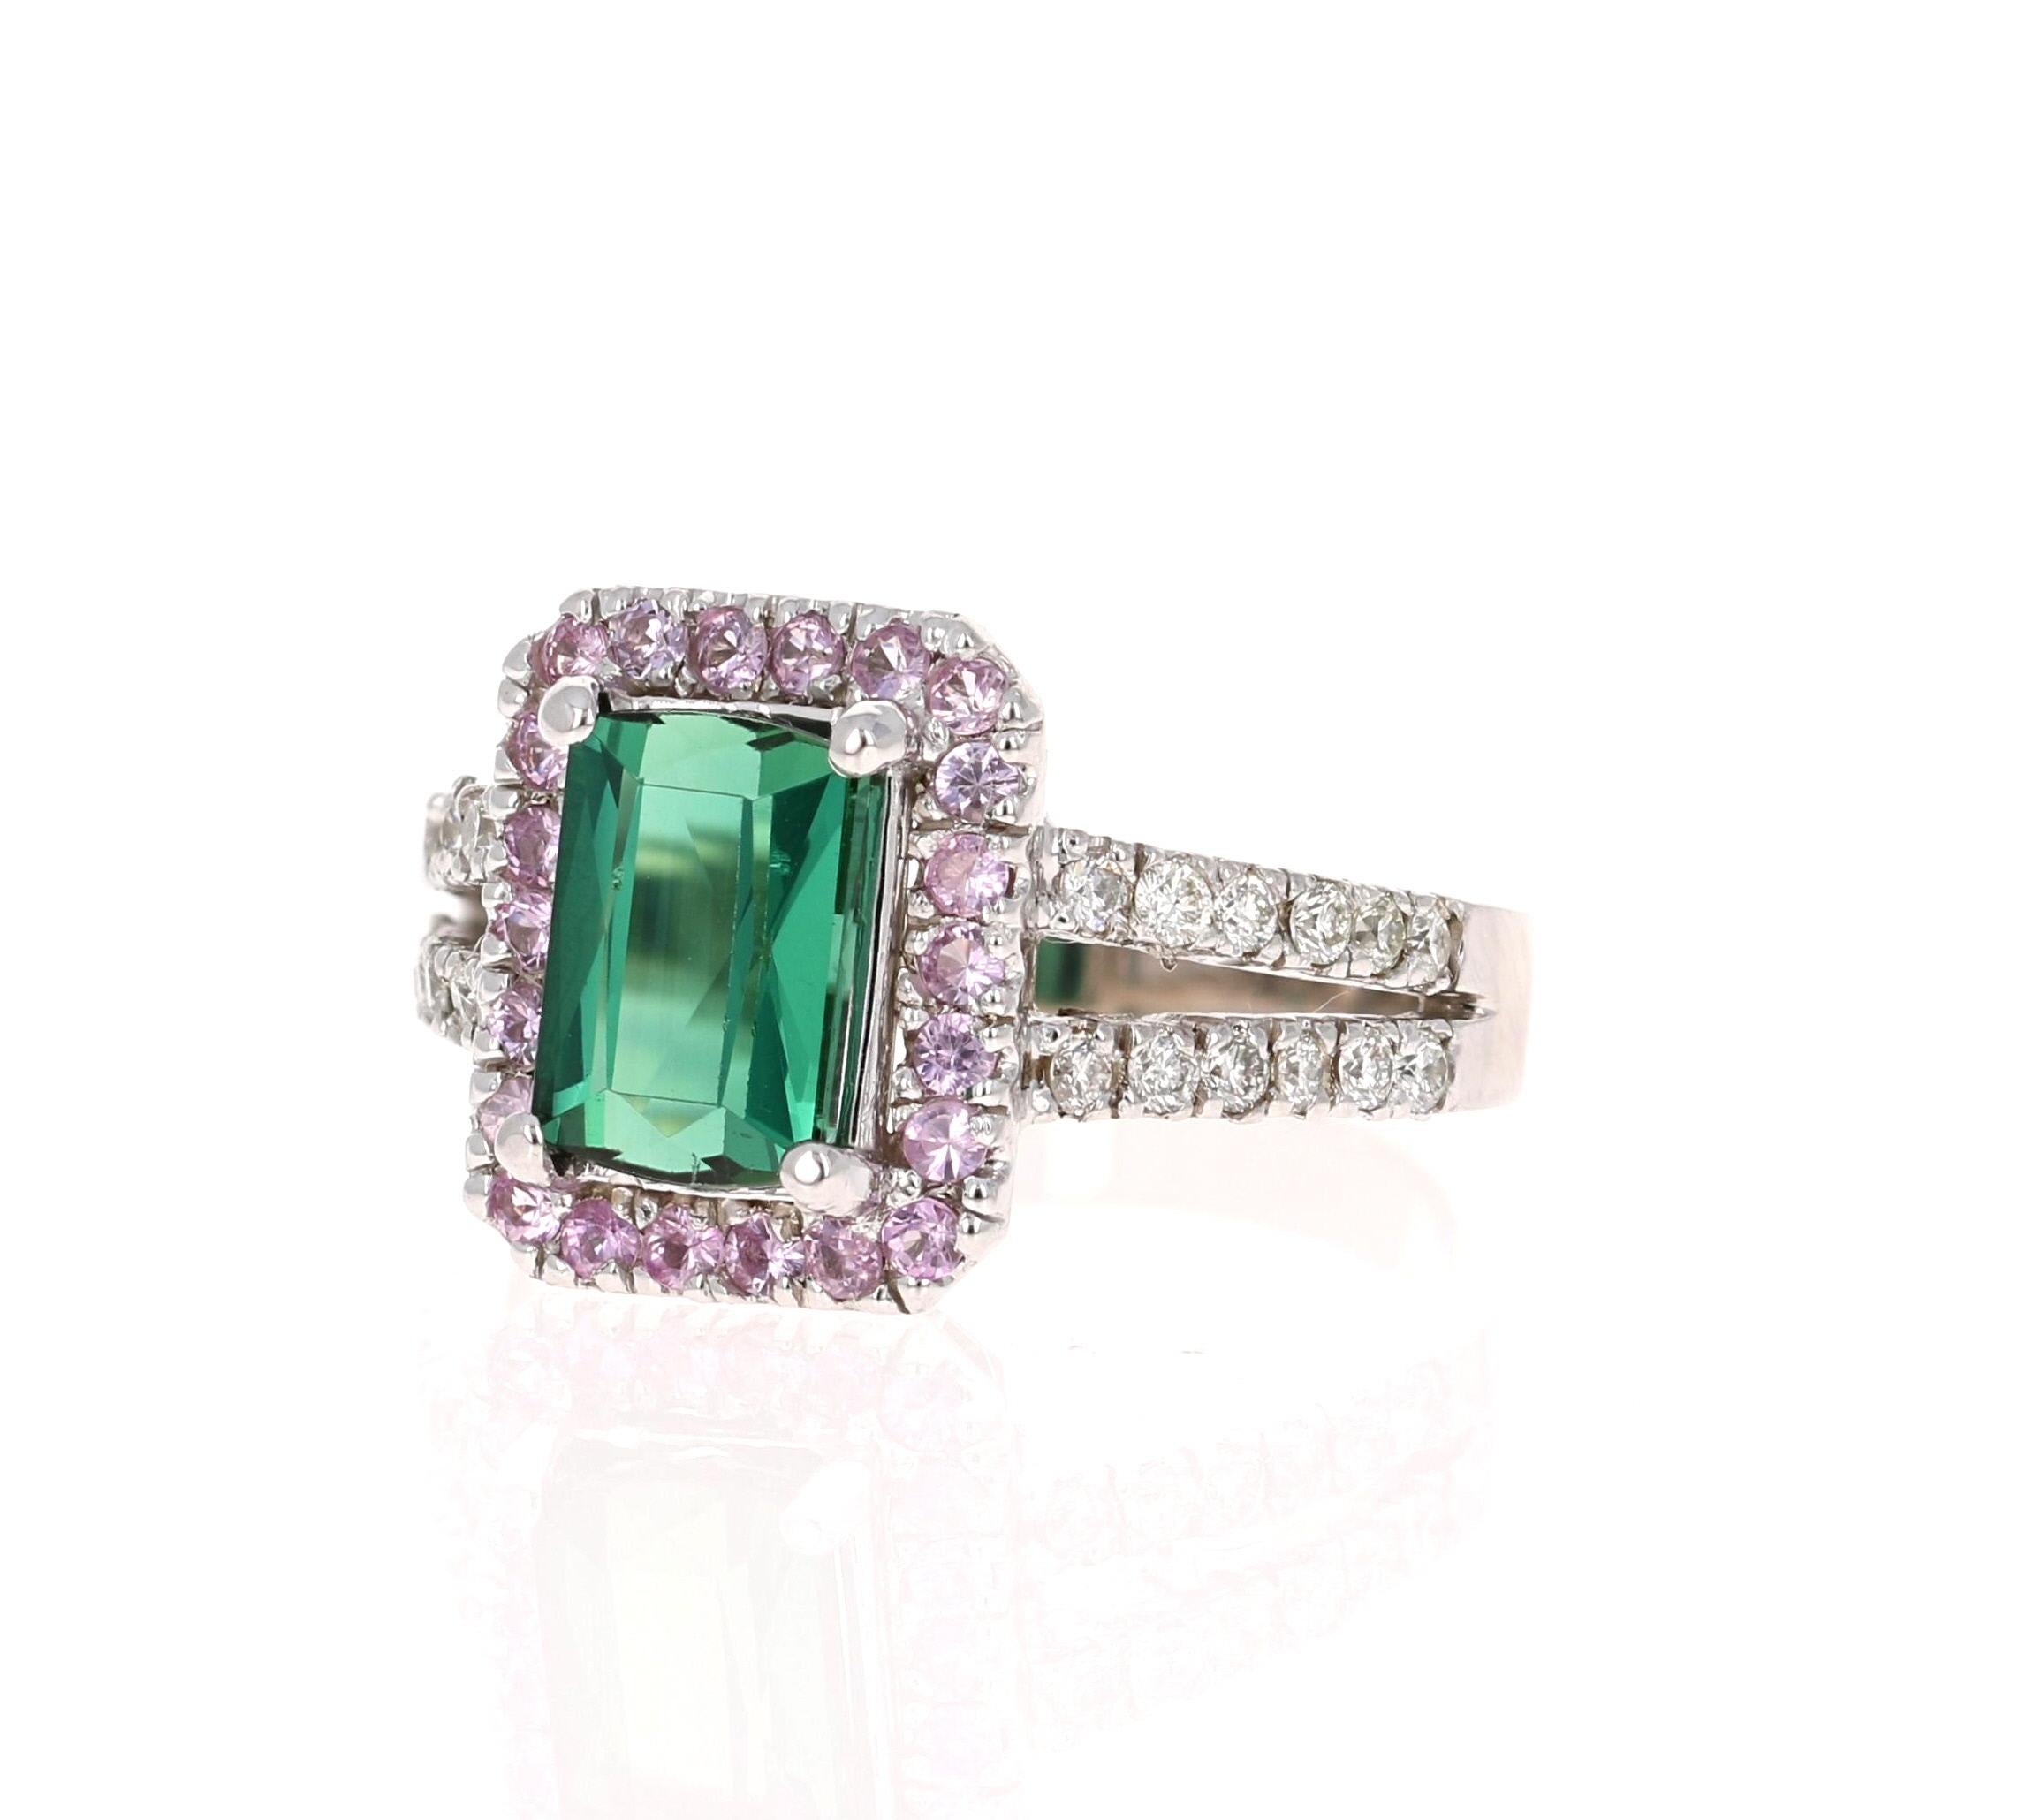 This beautifully designed ring has an Emerald Cut Green Tourmaline that weighs 1.82 Carats and is surrounded by 22 Round Cut Pink Sapphires that weigh 0.38 Carats and 24 Round Cut Diamonds along the shank of the ring that weigh 0.36 Carats (Clarity: